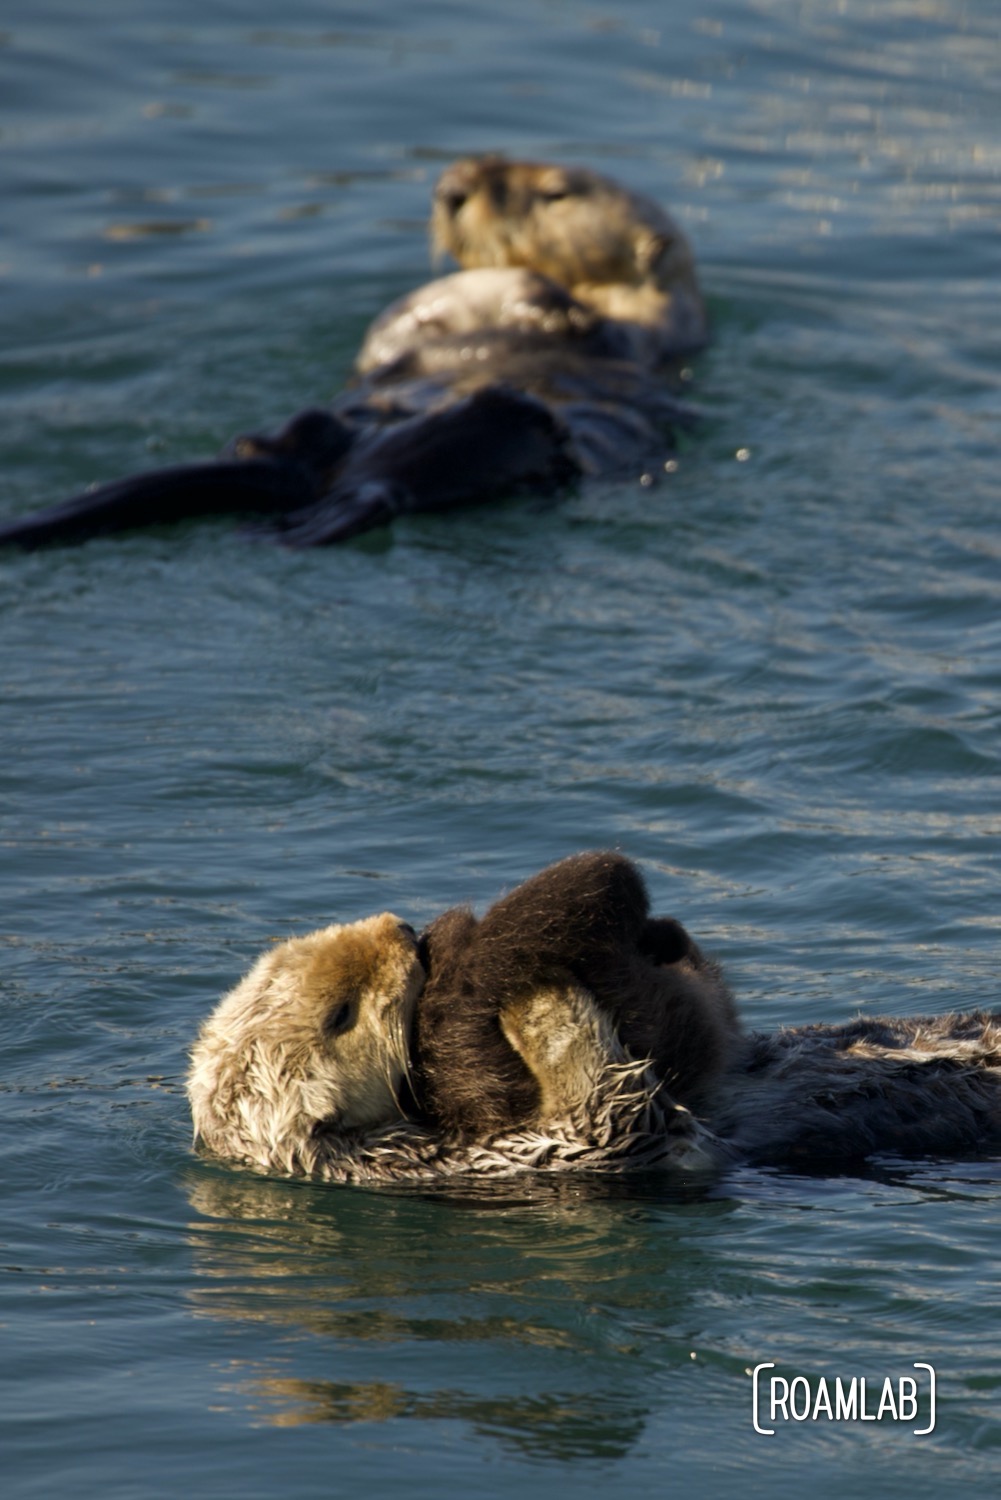 Mother sea otter blowing air into the fir of her infant in Morro Bay, California.